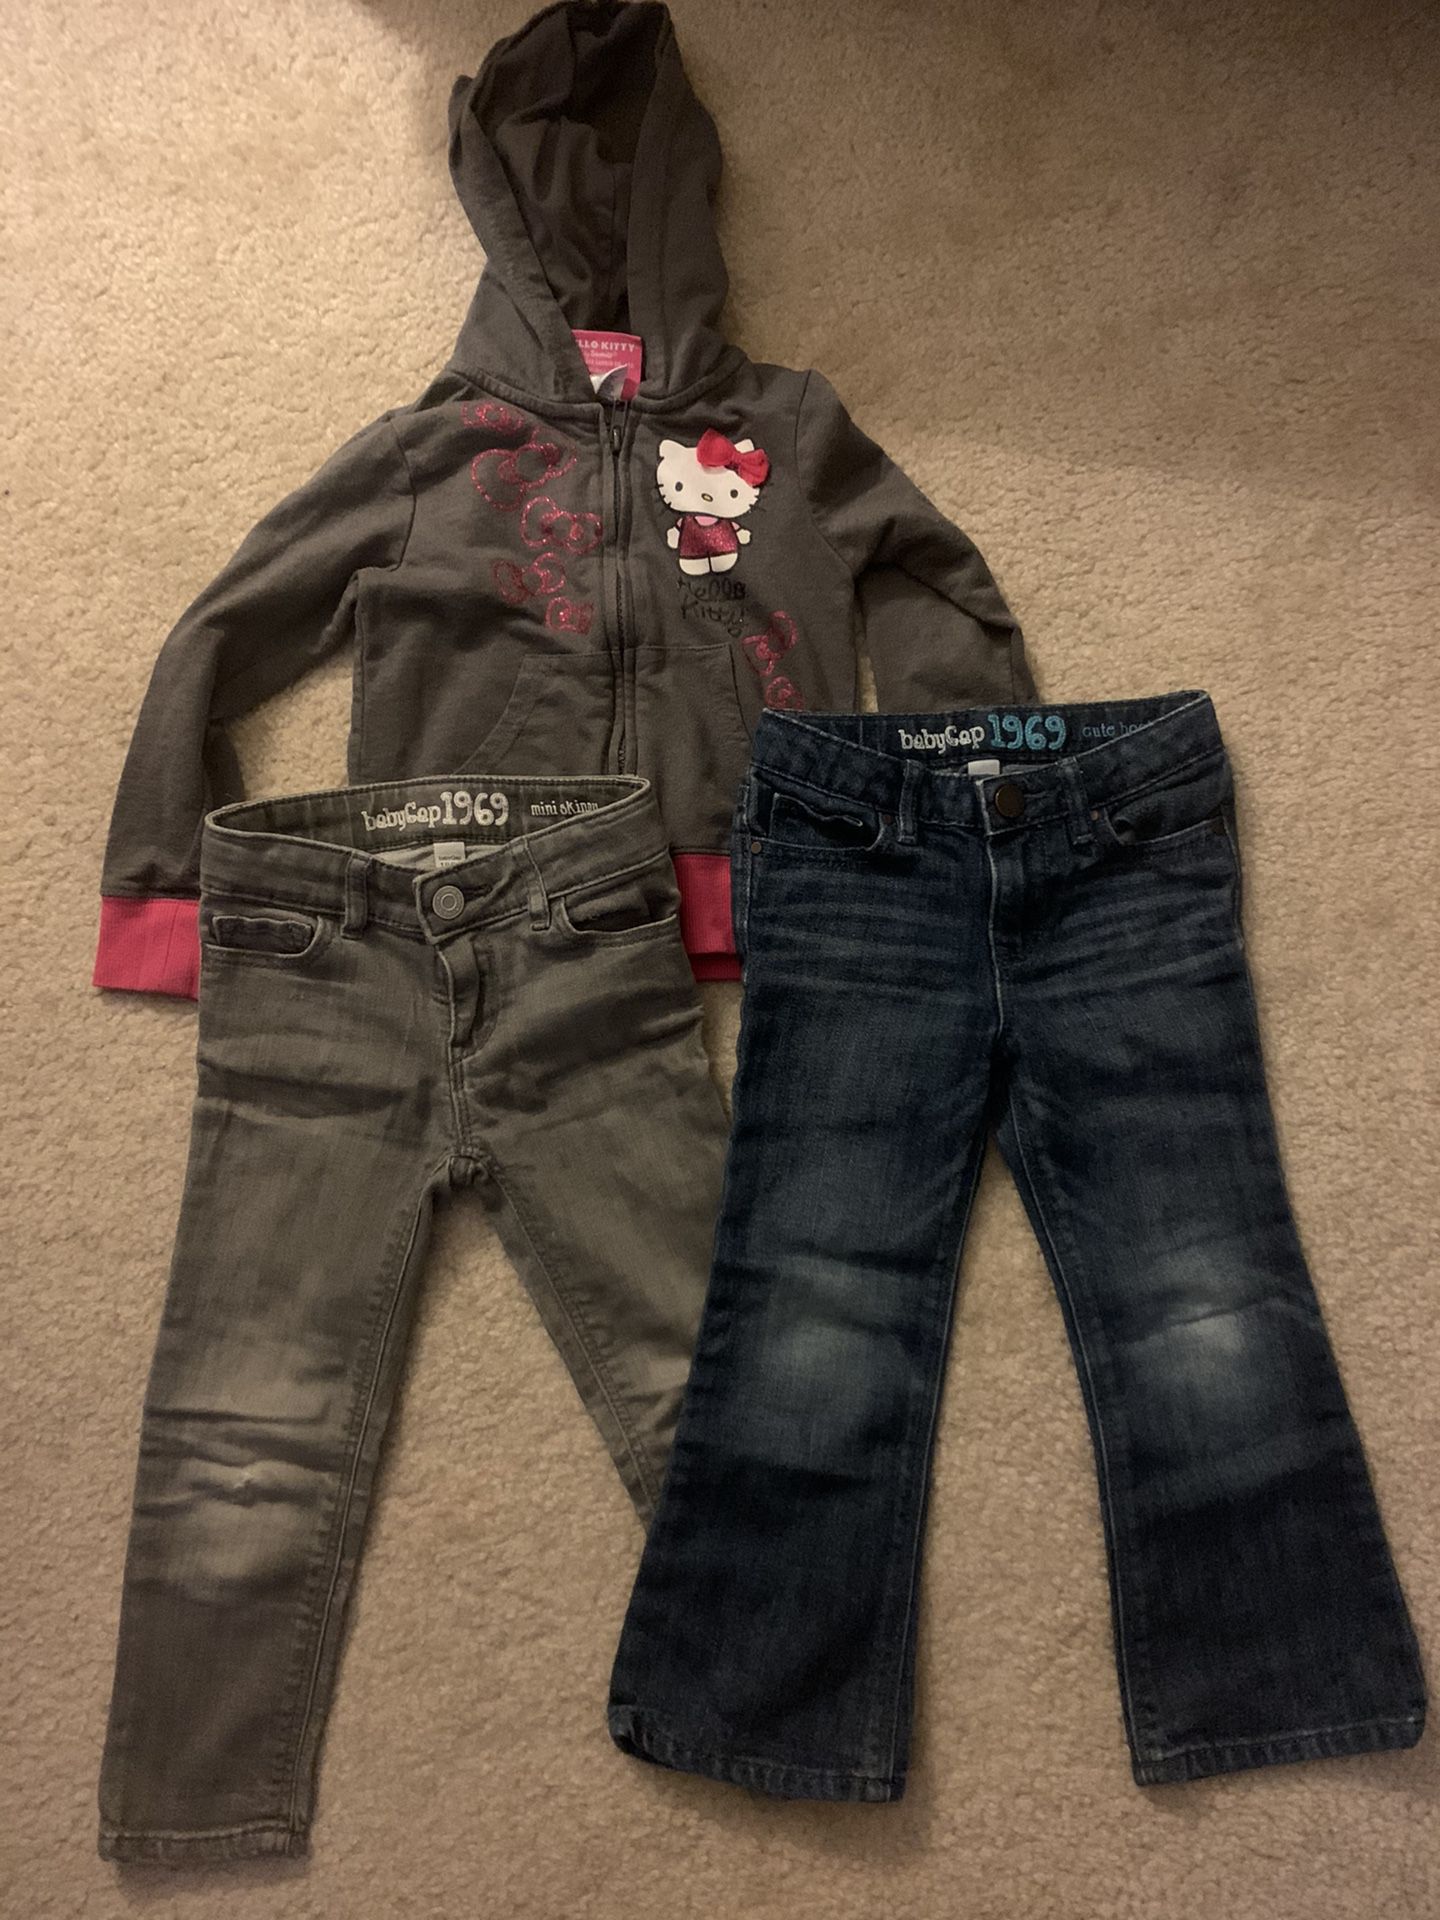 Gap kids Jeans Size 3 and Hello Kitty Hoodie size 4